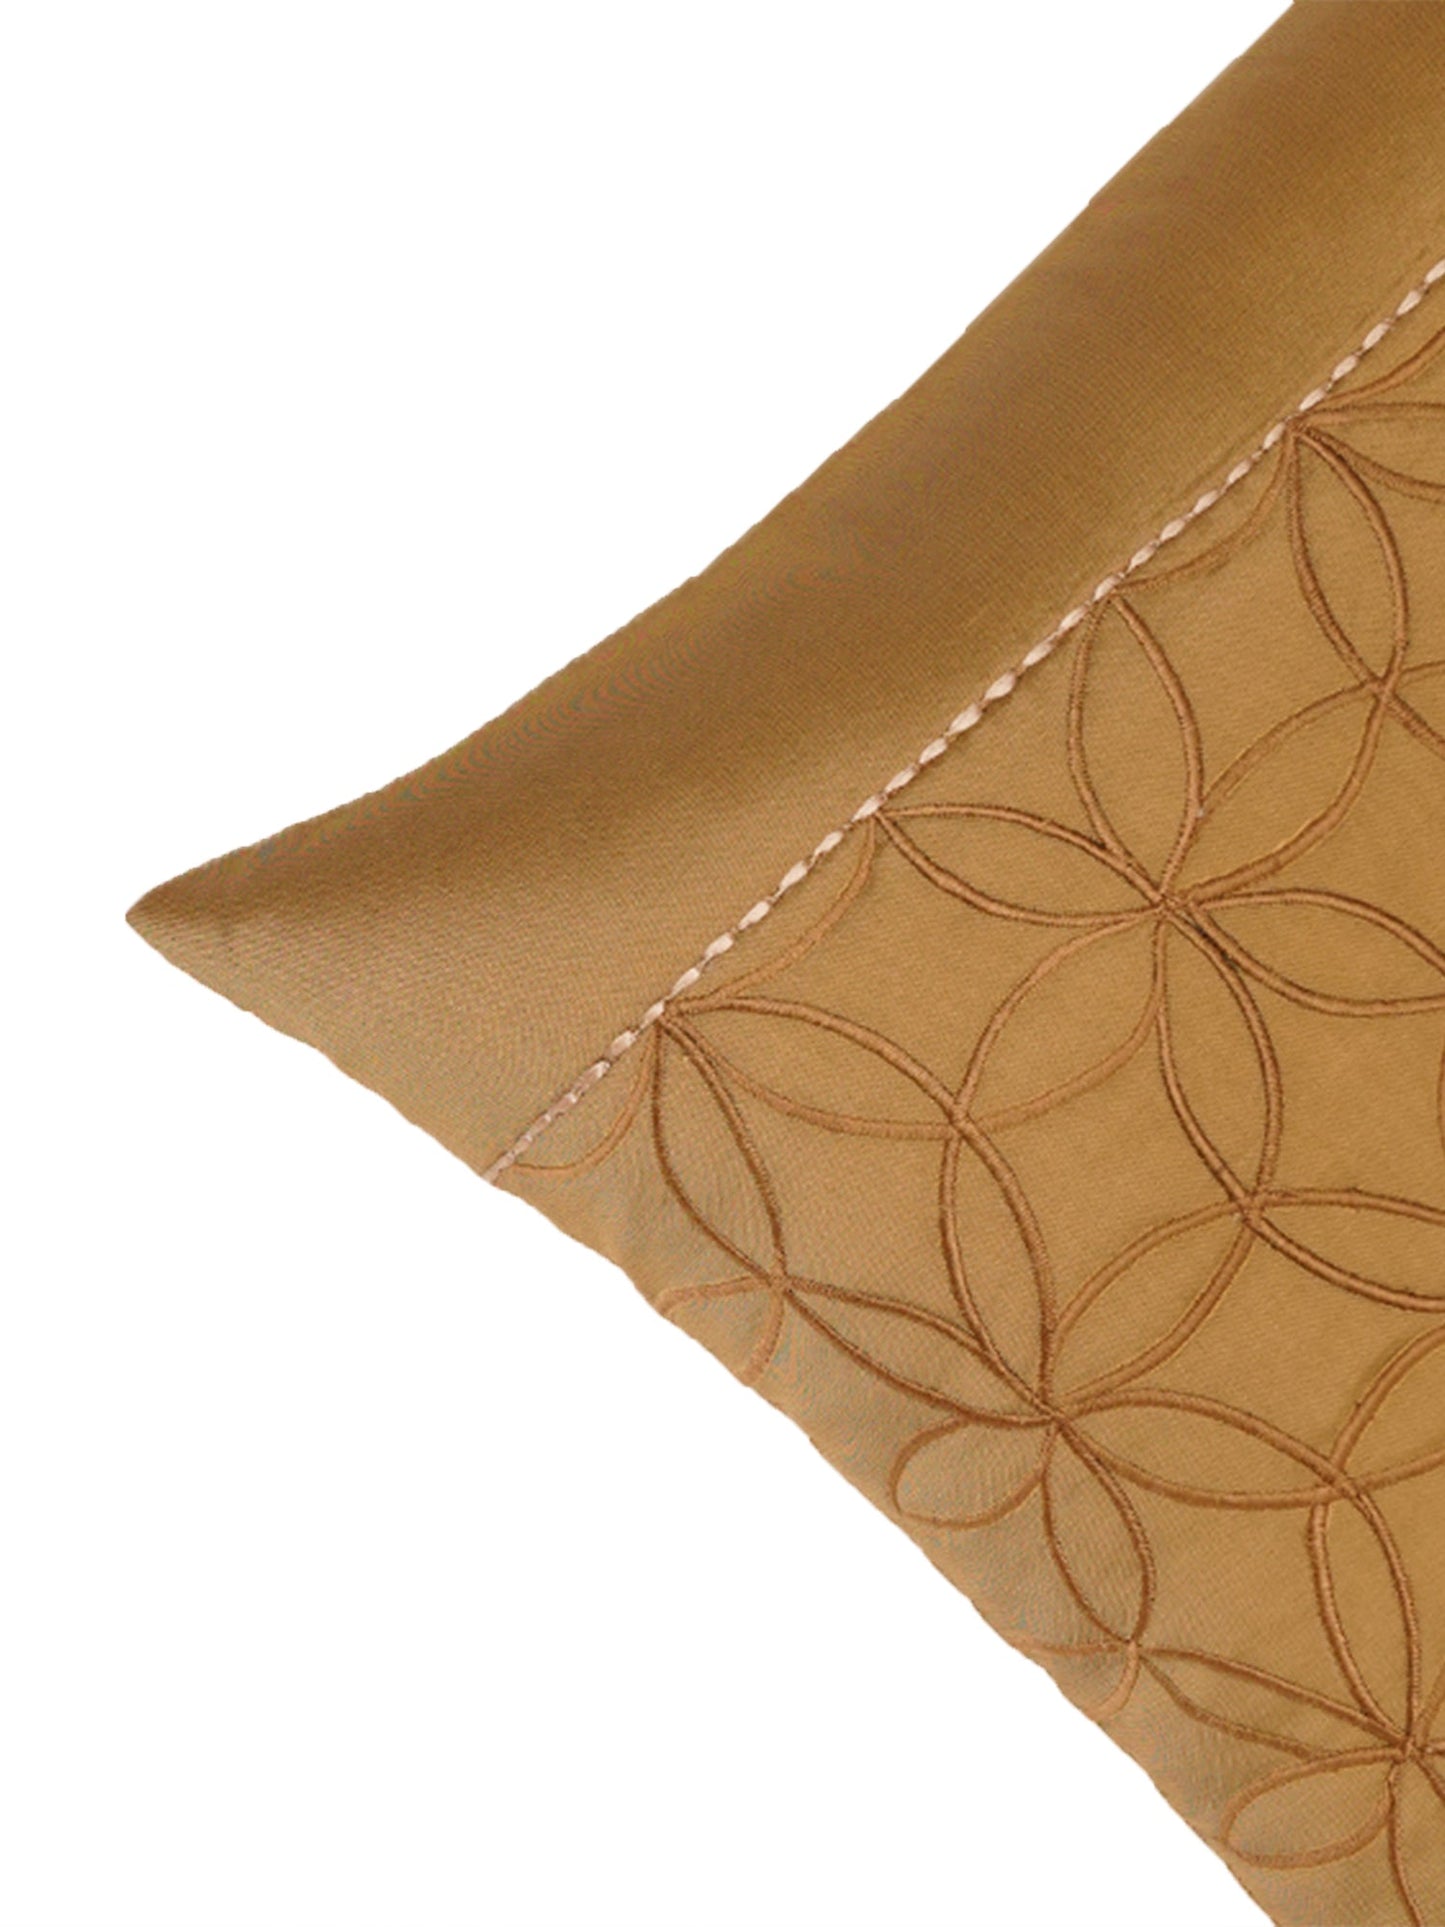 Golden Embroidered Cushion Cover in 16"x16"